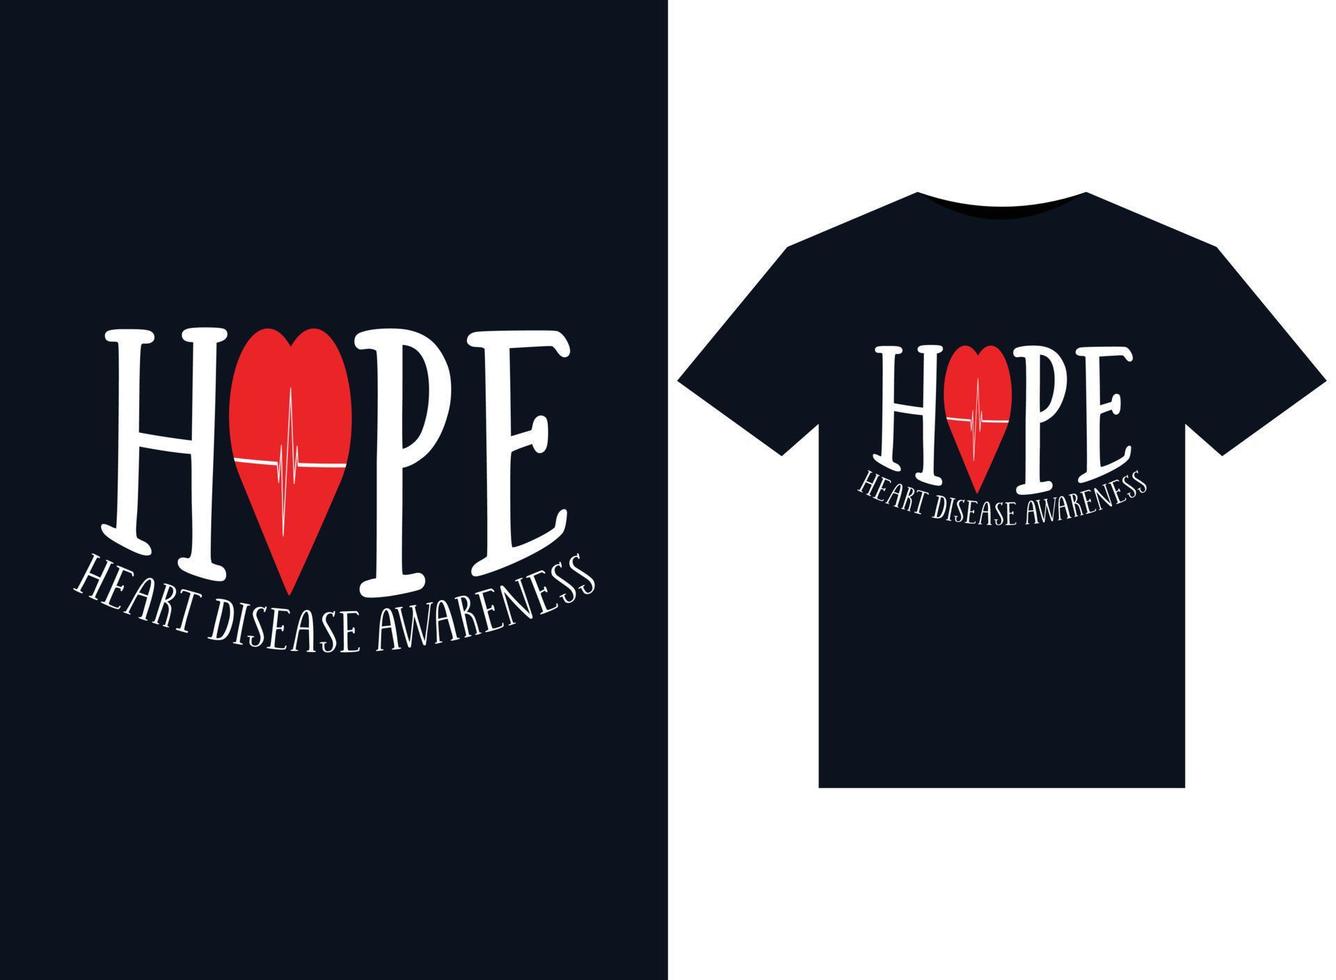 Hope Heart Disease Awareness illustrations for print-ready T-Shirts design vector